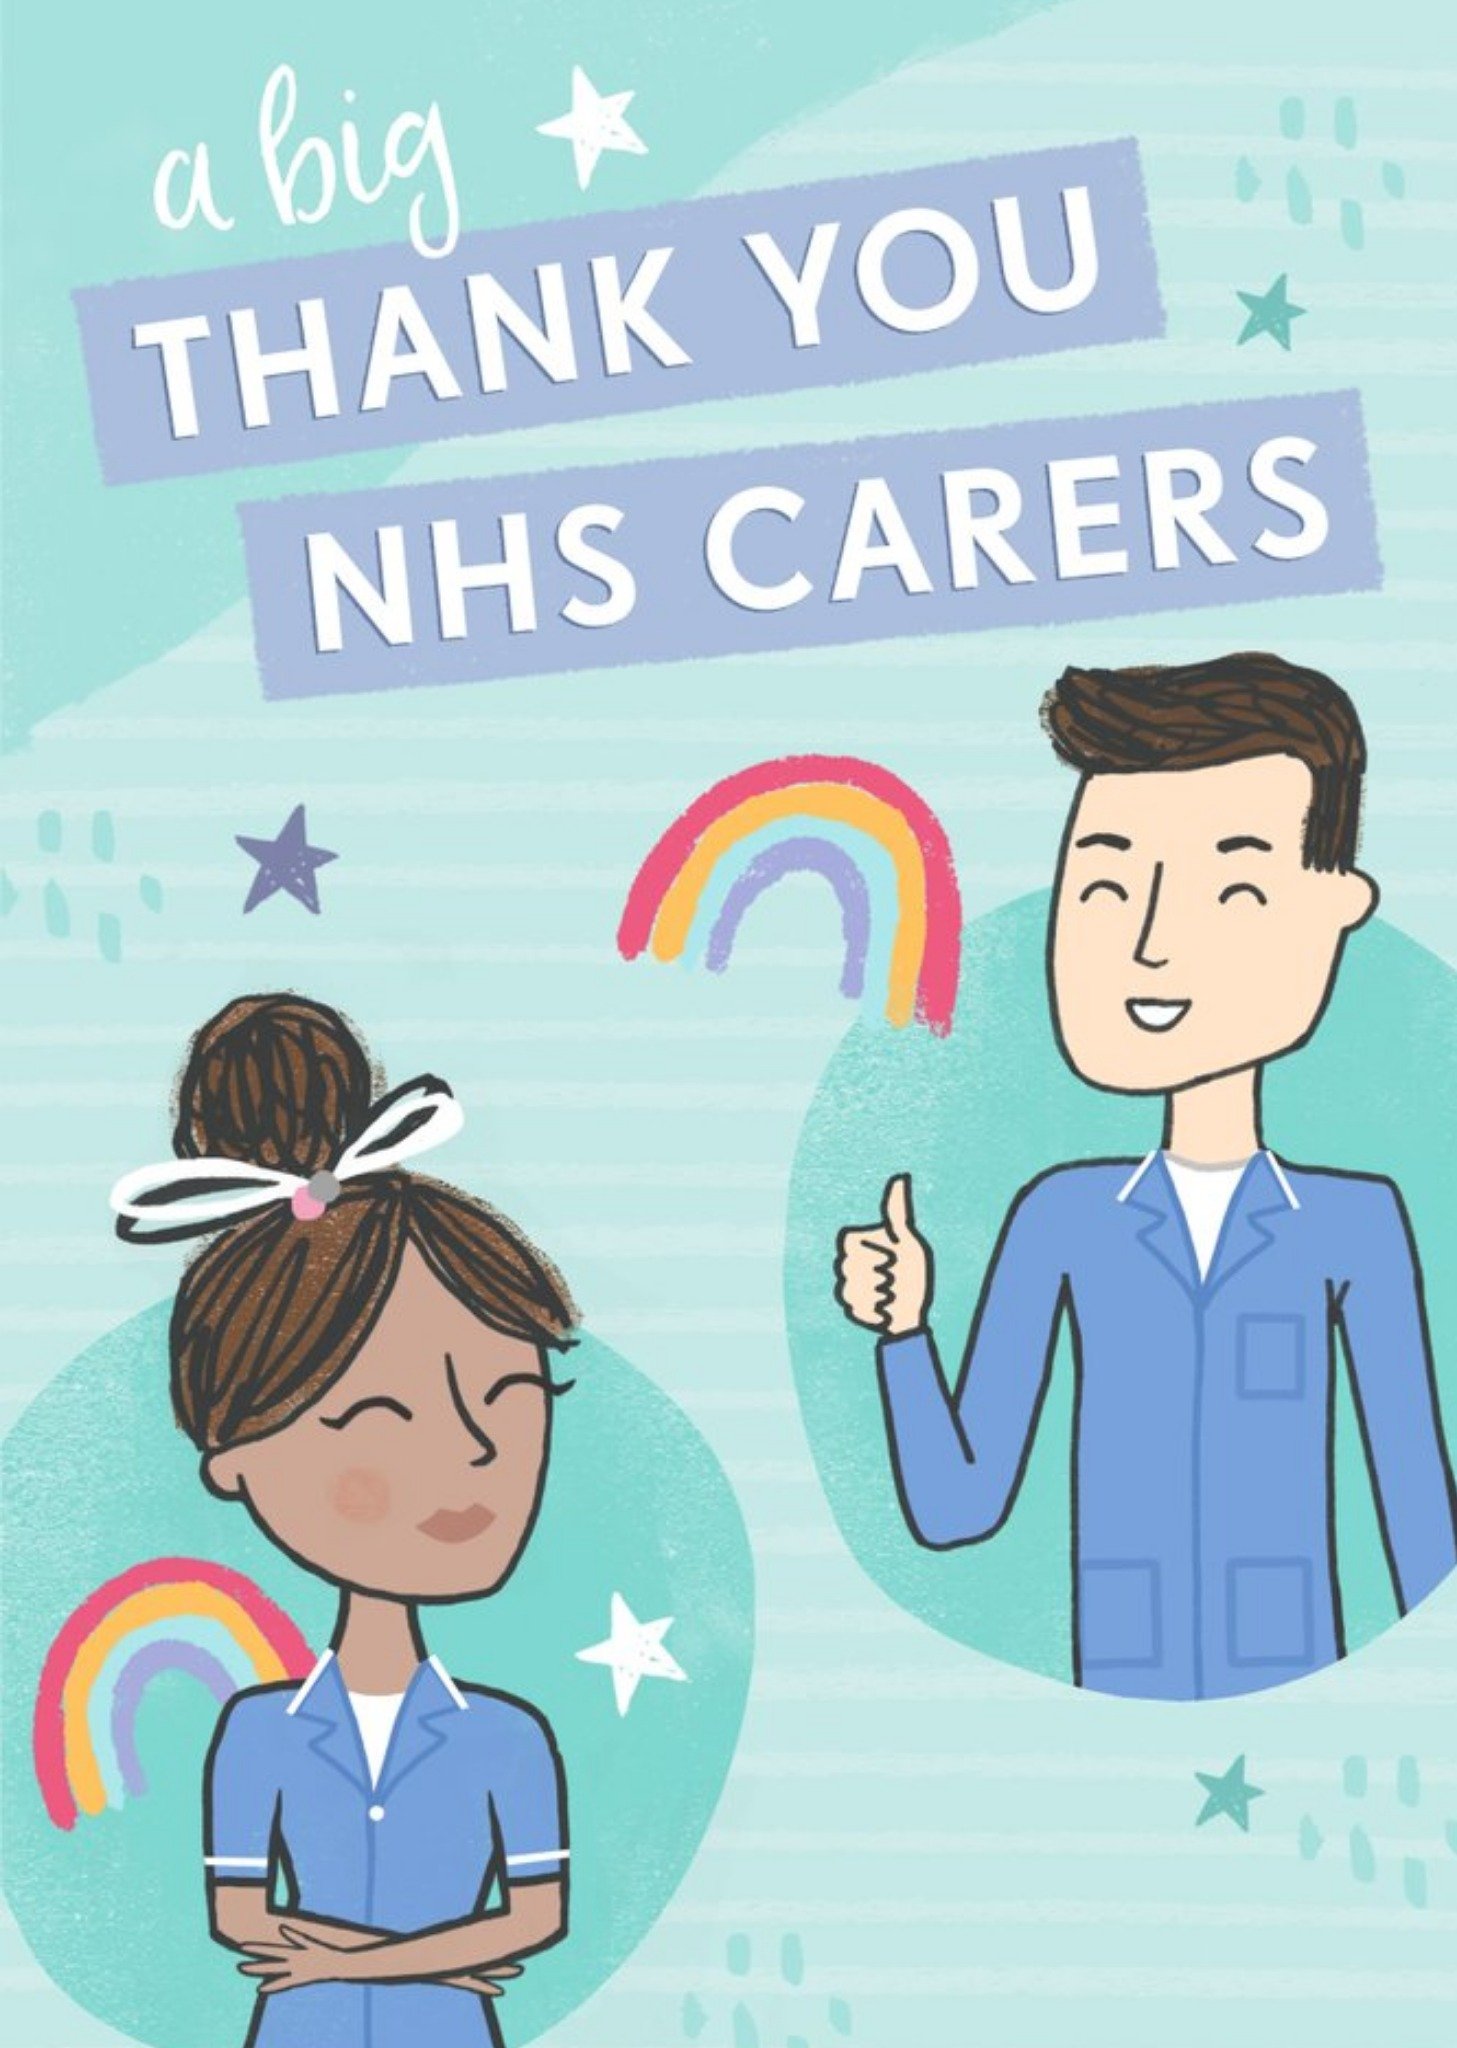 Other Raspberry Fizz A Big Thank You Nhs Carers Illustrated Thank You Card Ecard